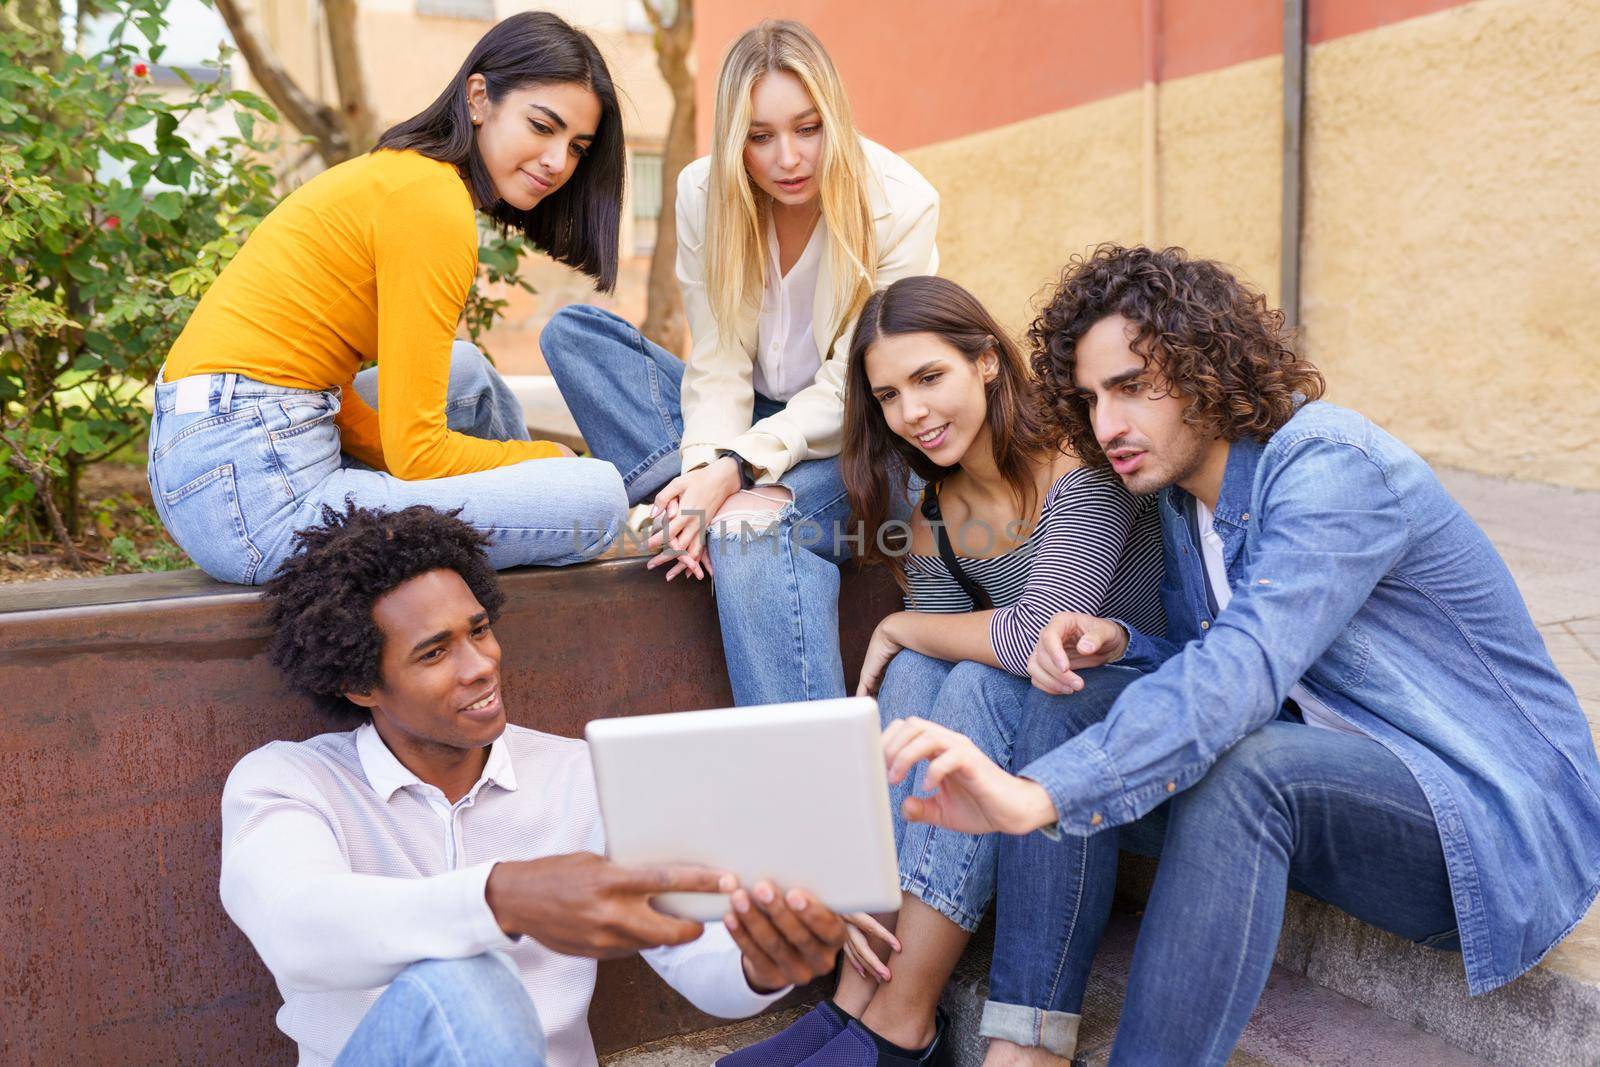 Multi-ethnic group of young people looking at a digital tablet outdoors in urban background. by javiindy